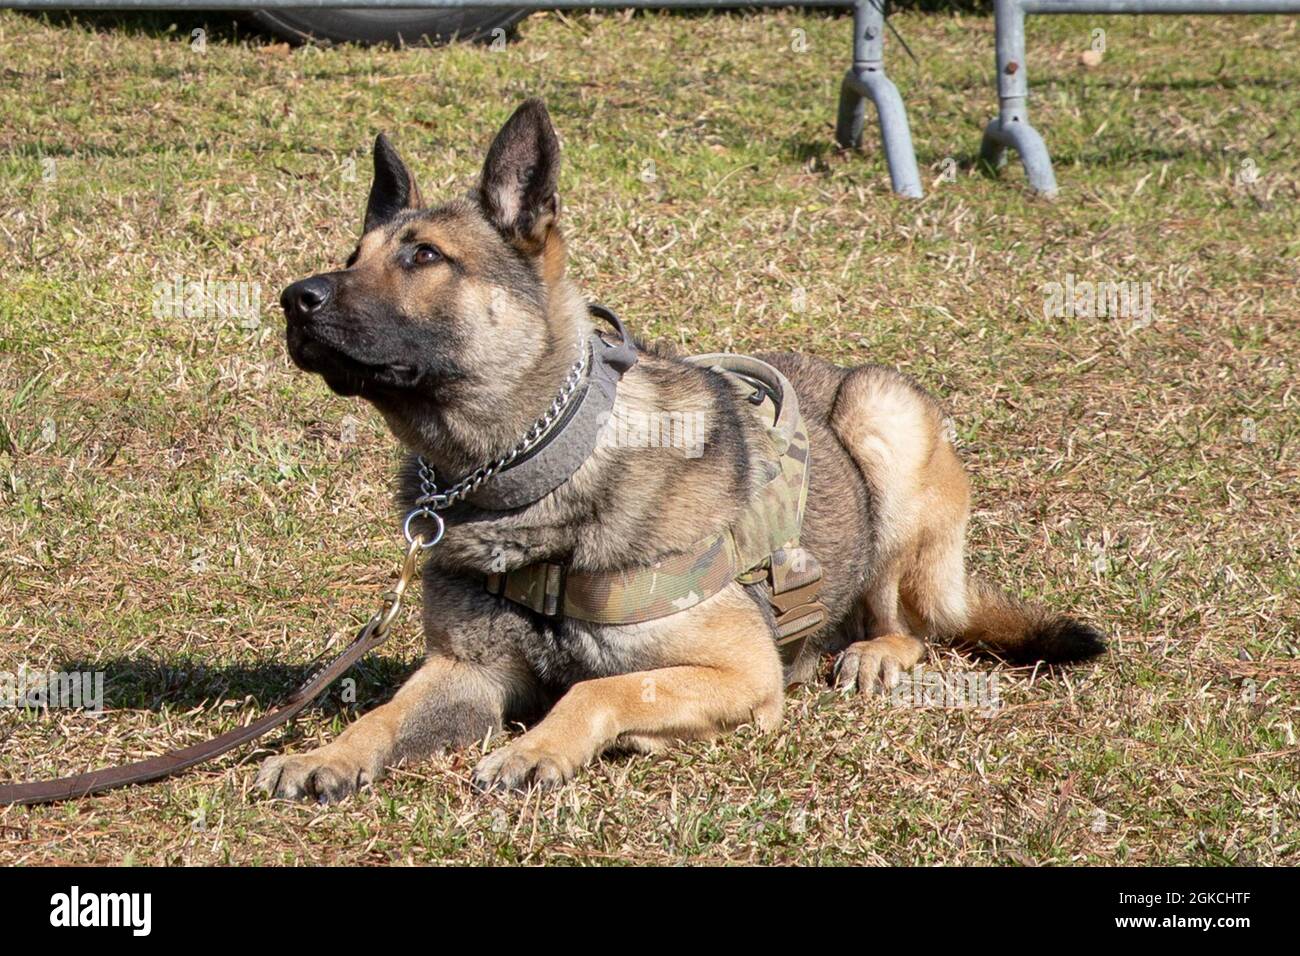 Military Working Dog Groll, a K-9 assigned to 93rd Military Working Dogs Detachment, 385th Military Police Battalion, awaits commands from his handler during a MWD demonstration March 13, 2021, at Holbrook Pond in Fort Stewart, Georgia. The 93rd MWD Det. supports the U.S. Forces Command and U.S. Secret Service missions by performing specialized security patrols and detecting explosives and narcotics. Stock Photo